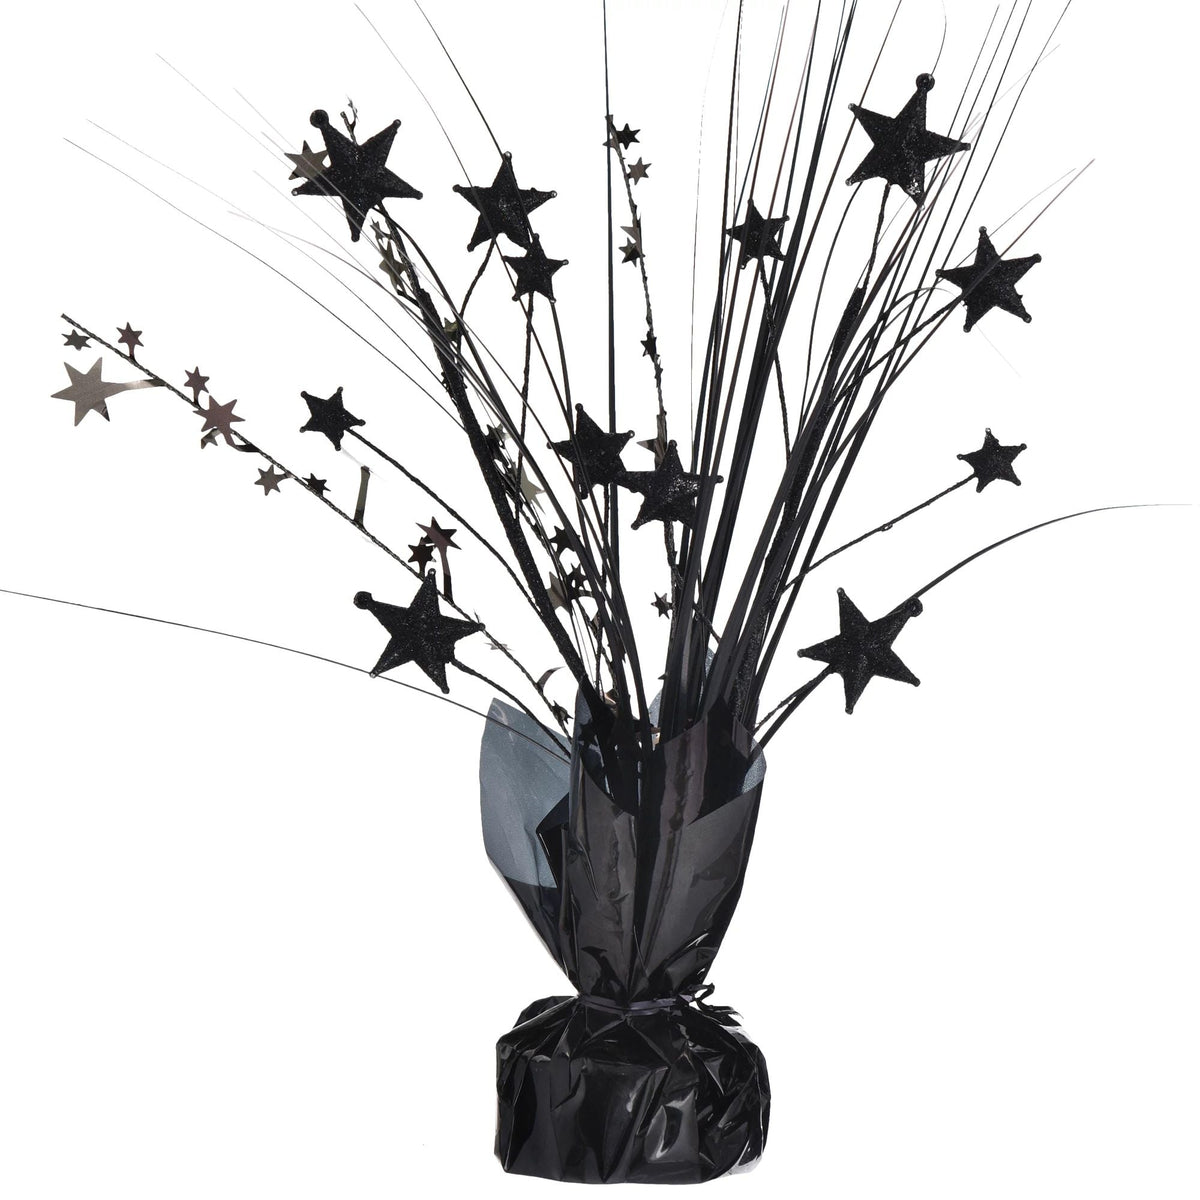 AMSCAN CA Decorations Spray Centerpiece with Stars, Black, 12 Inches, 1 Count